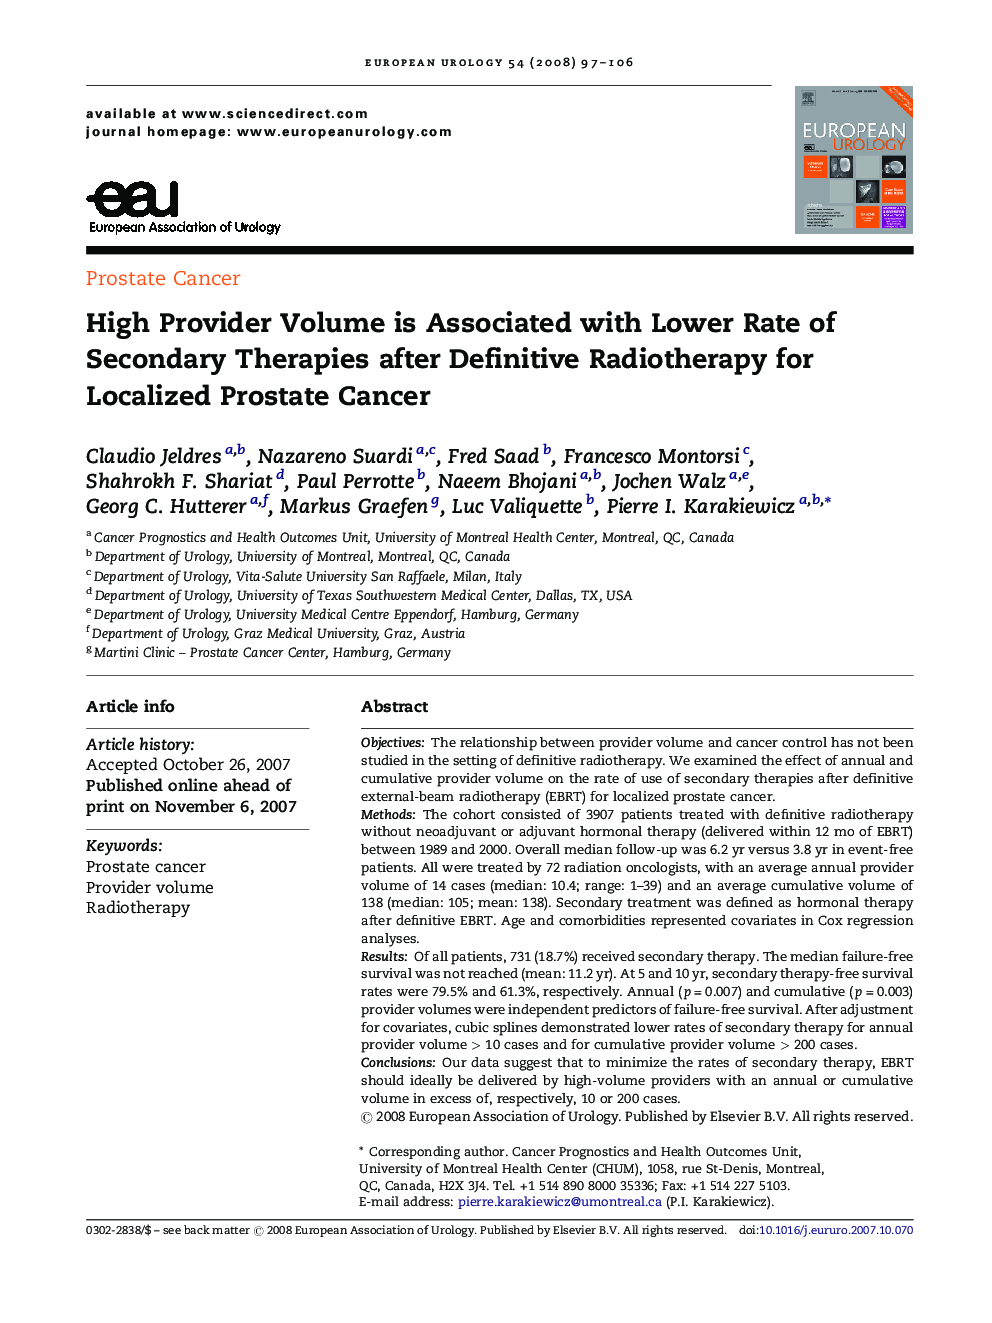 High Provider Volume is Associated with Lower Rate of Secondary Therapies after Definitive Radiotherapy for Localized Prostate Cancer